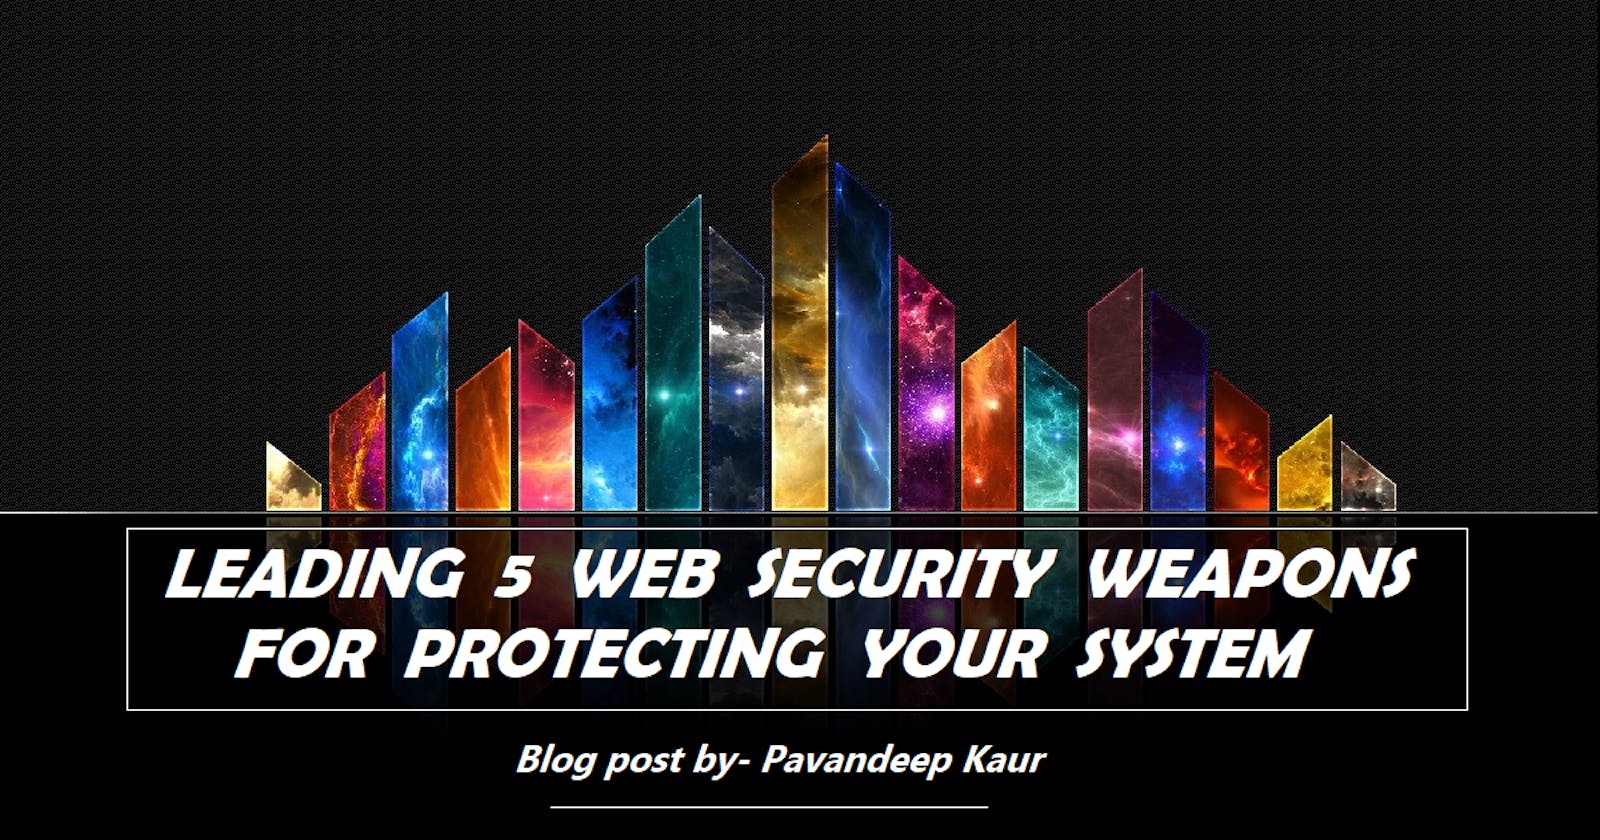 Leading 5 Web Security Weapons🛠 For Protecting Your System